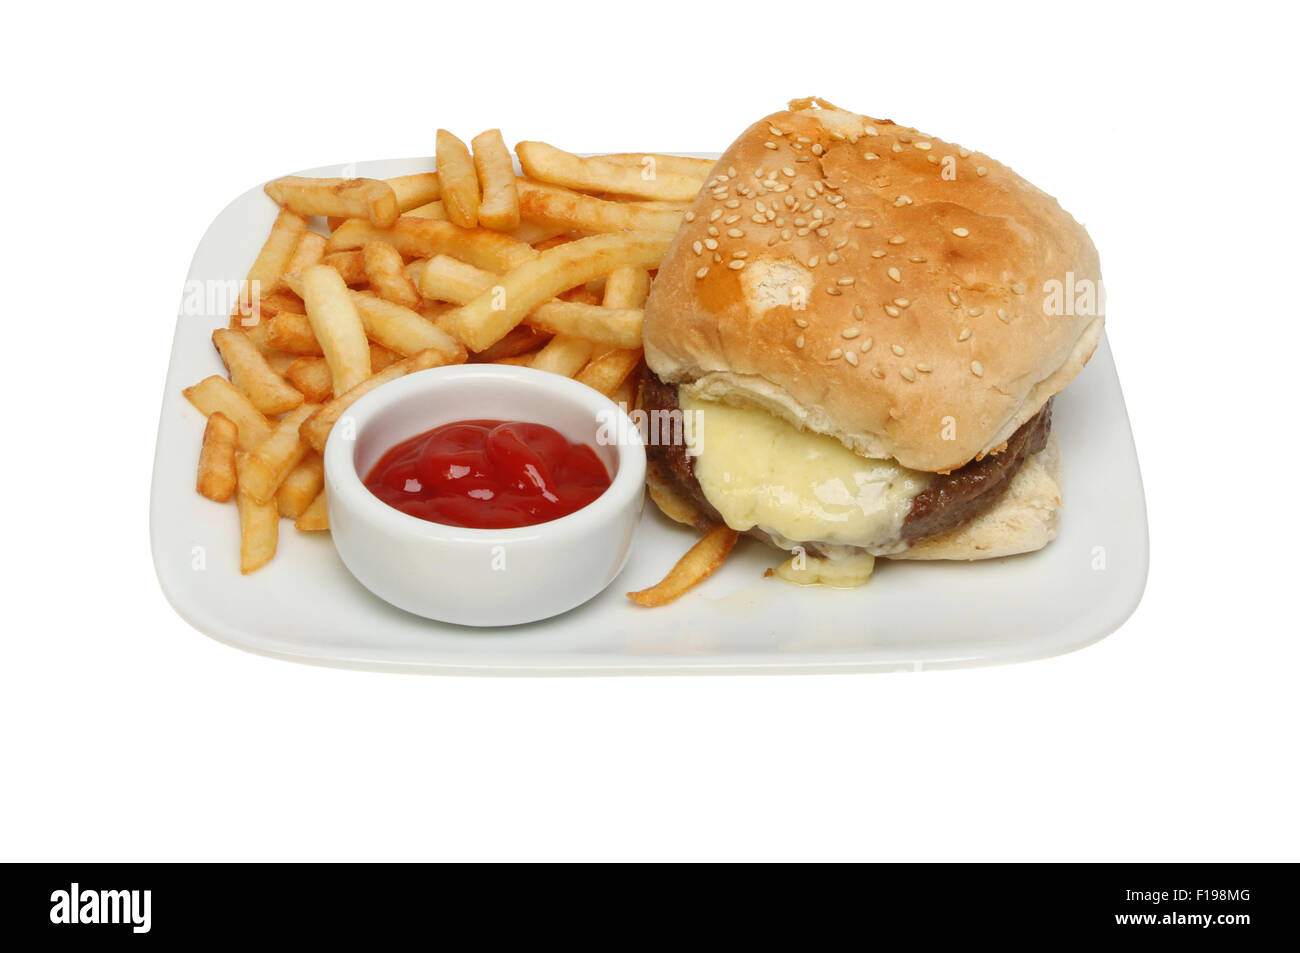 Cheeseburger with chips and tomato ketchup on a plate isolated against white Stock Photo